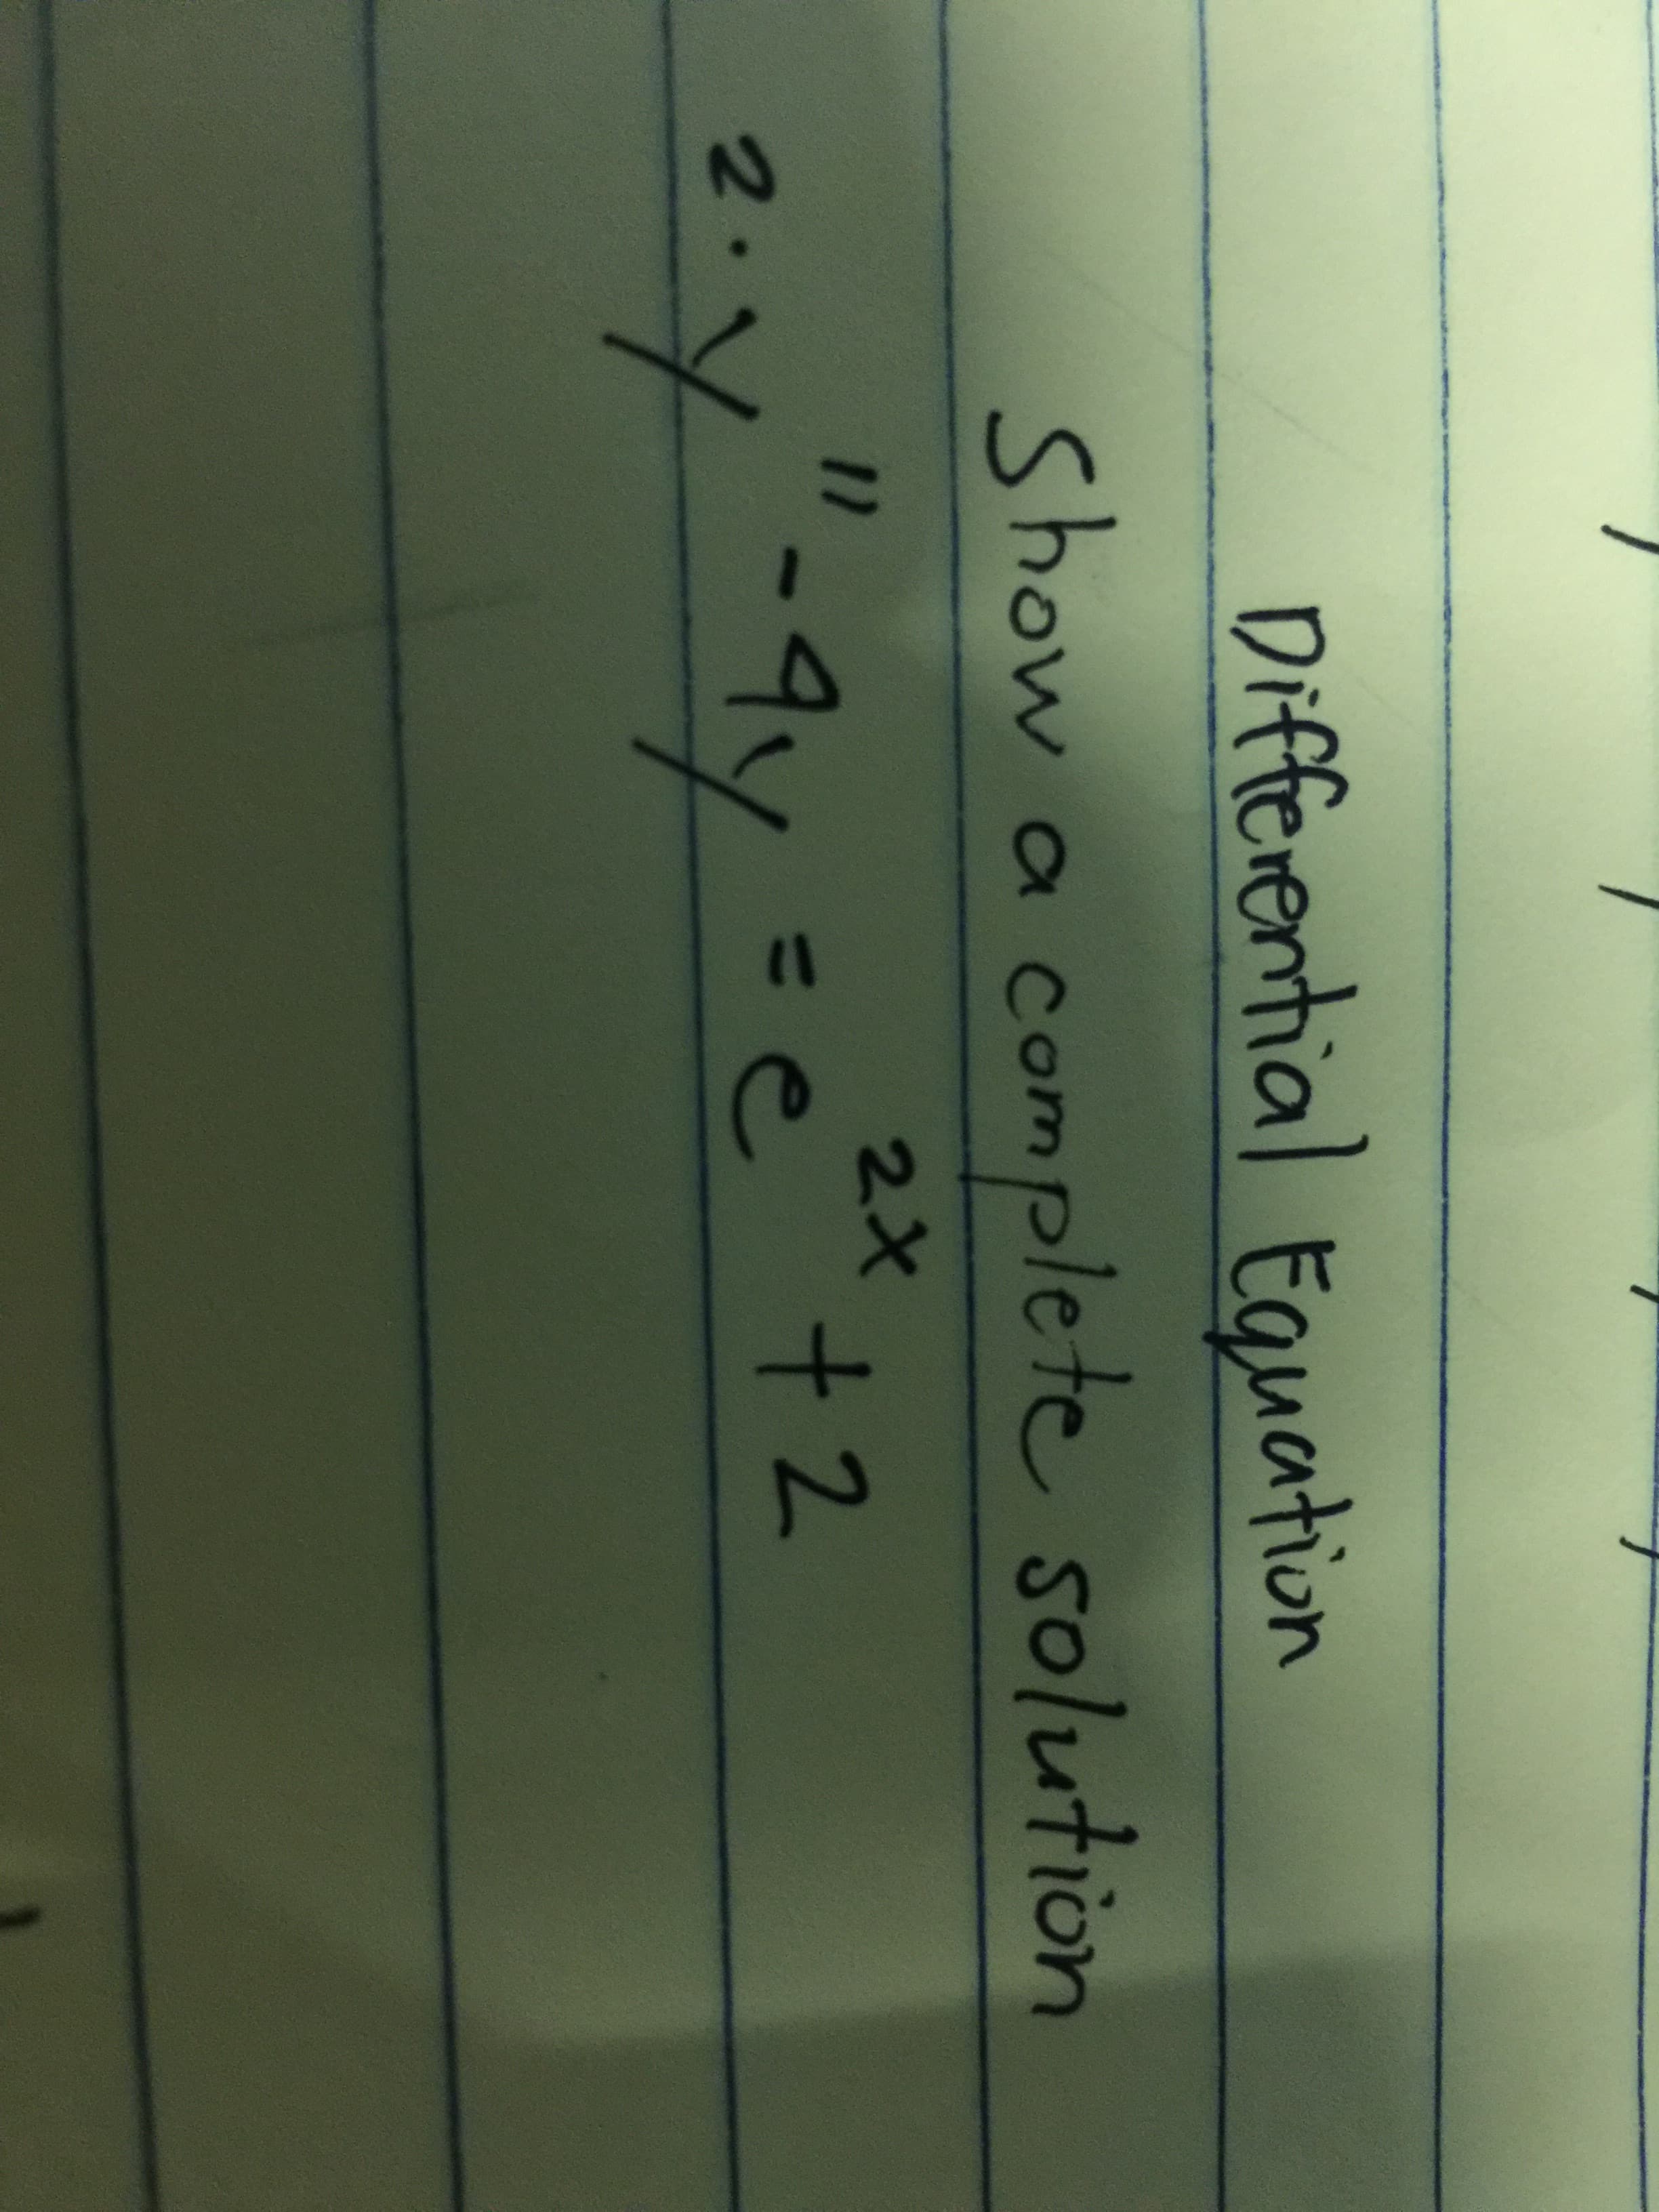 Differential Equation
Show a comple te solution
11
2X
2-y-ay
e t2
